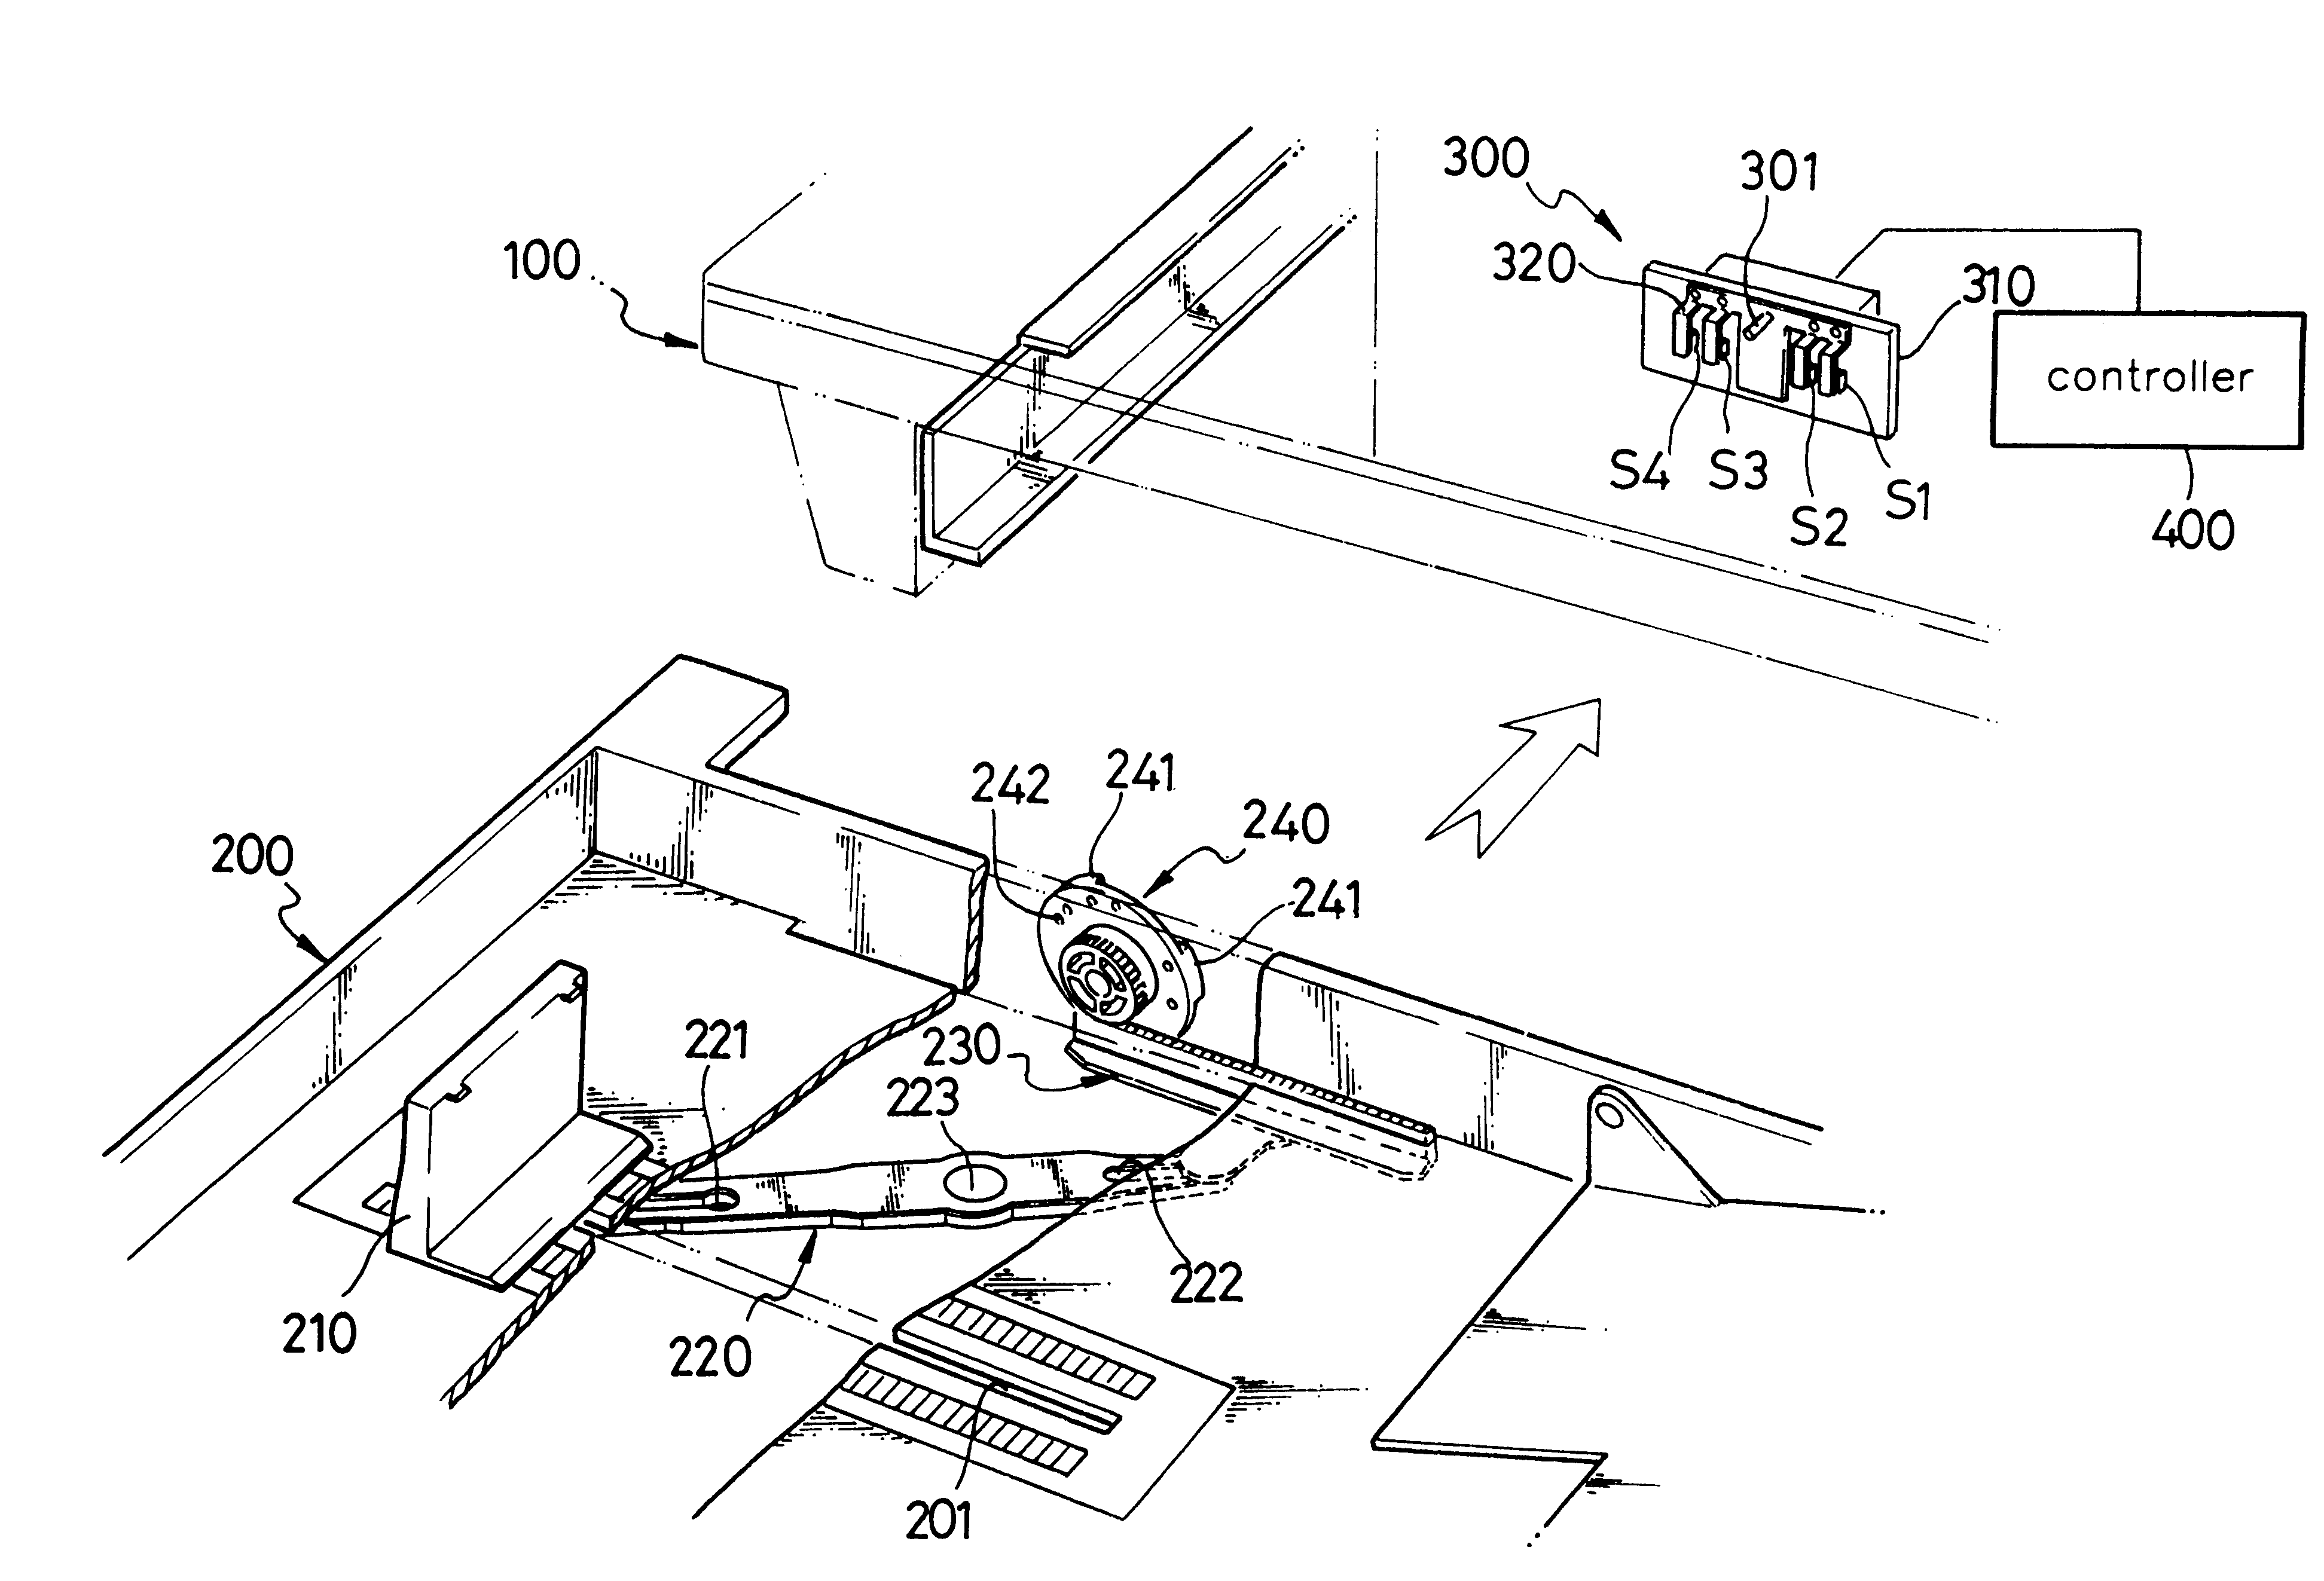 Paper feeding apparatus for printing device